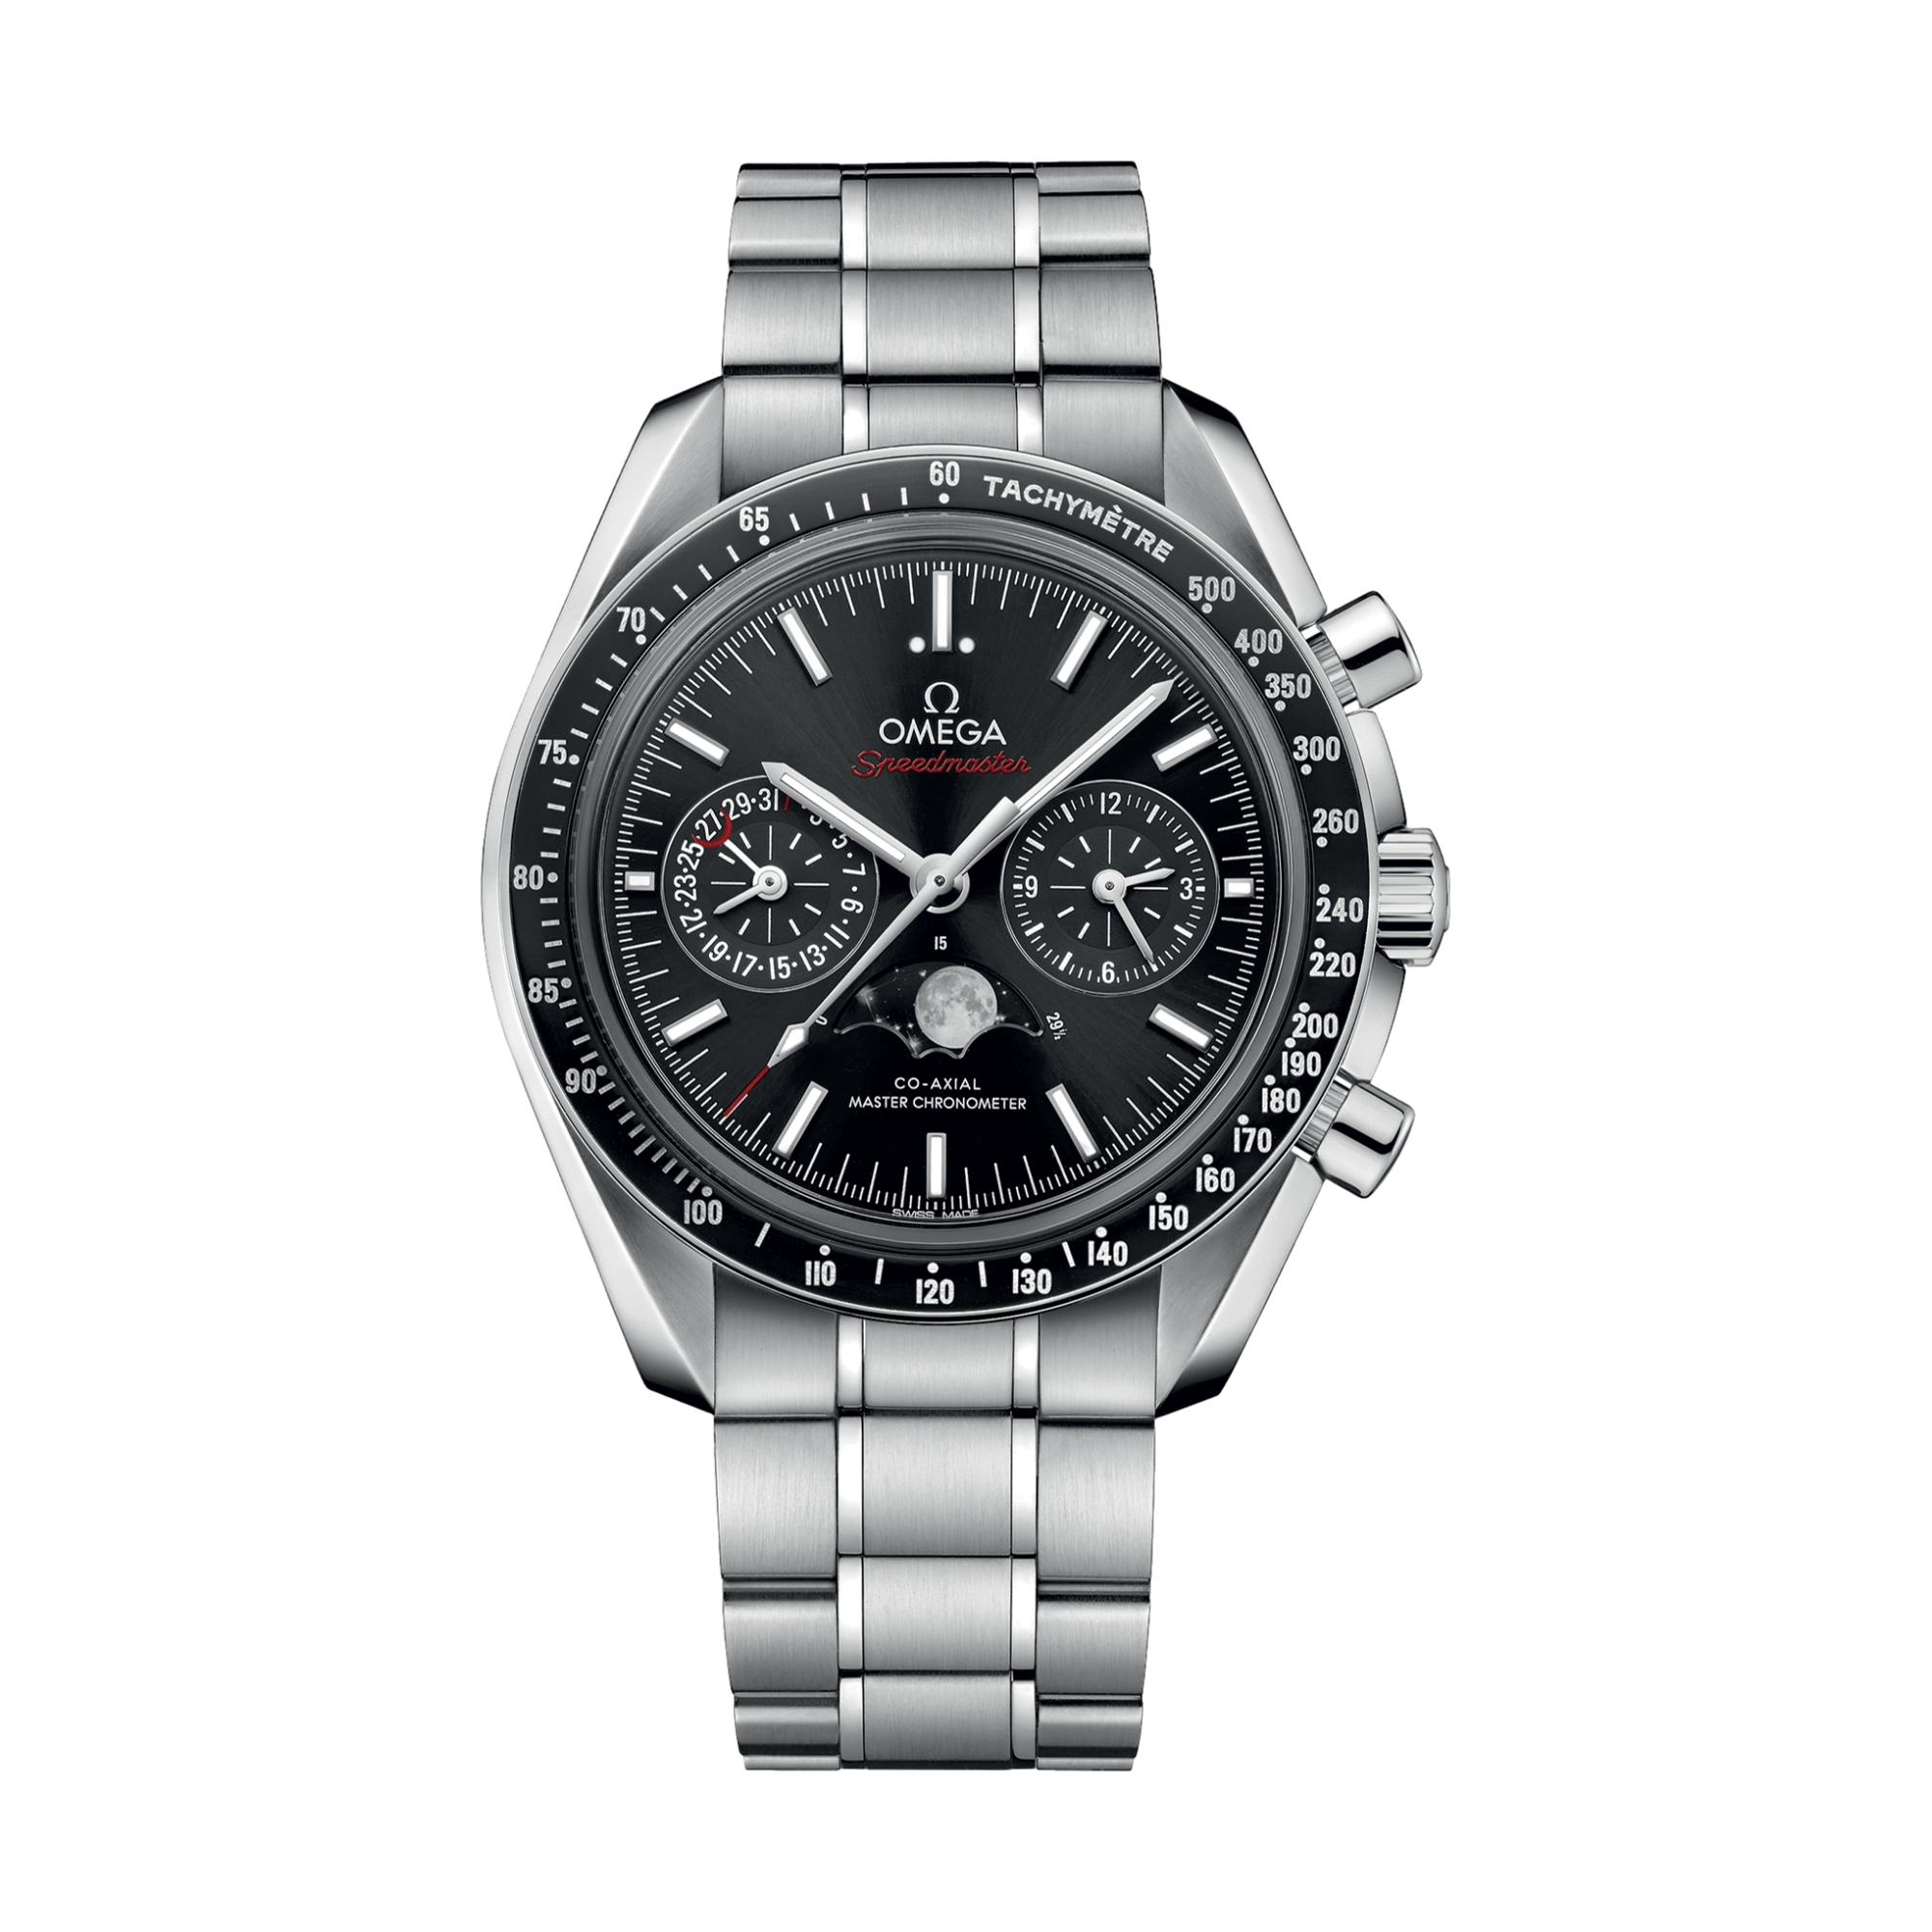 Speedmaster Moonphase Co-Axial Master Chronometer Chronograph 44.25 mm